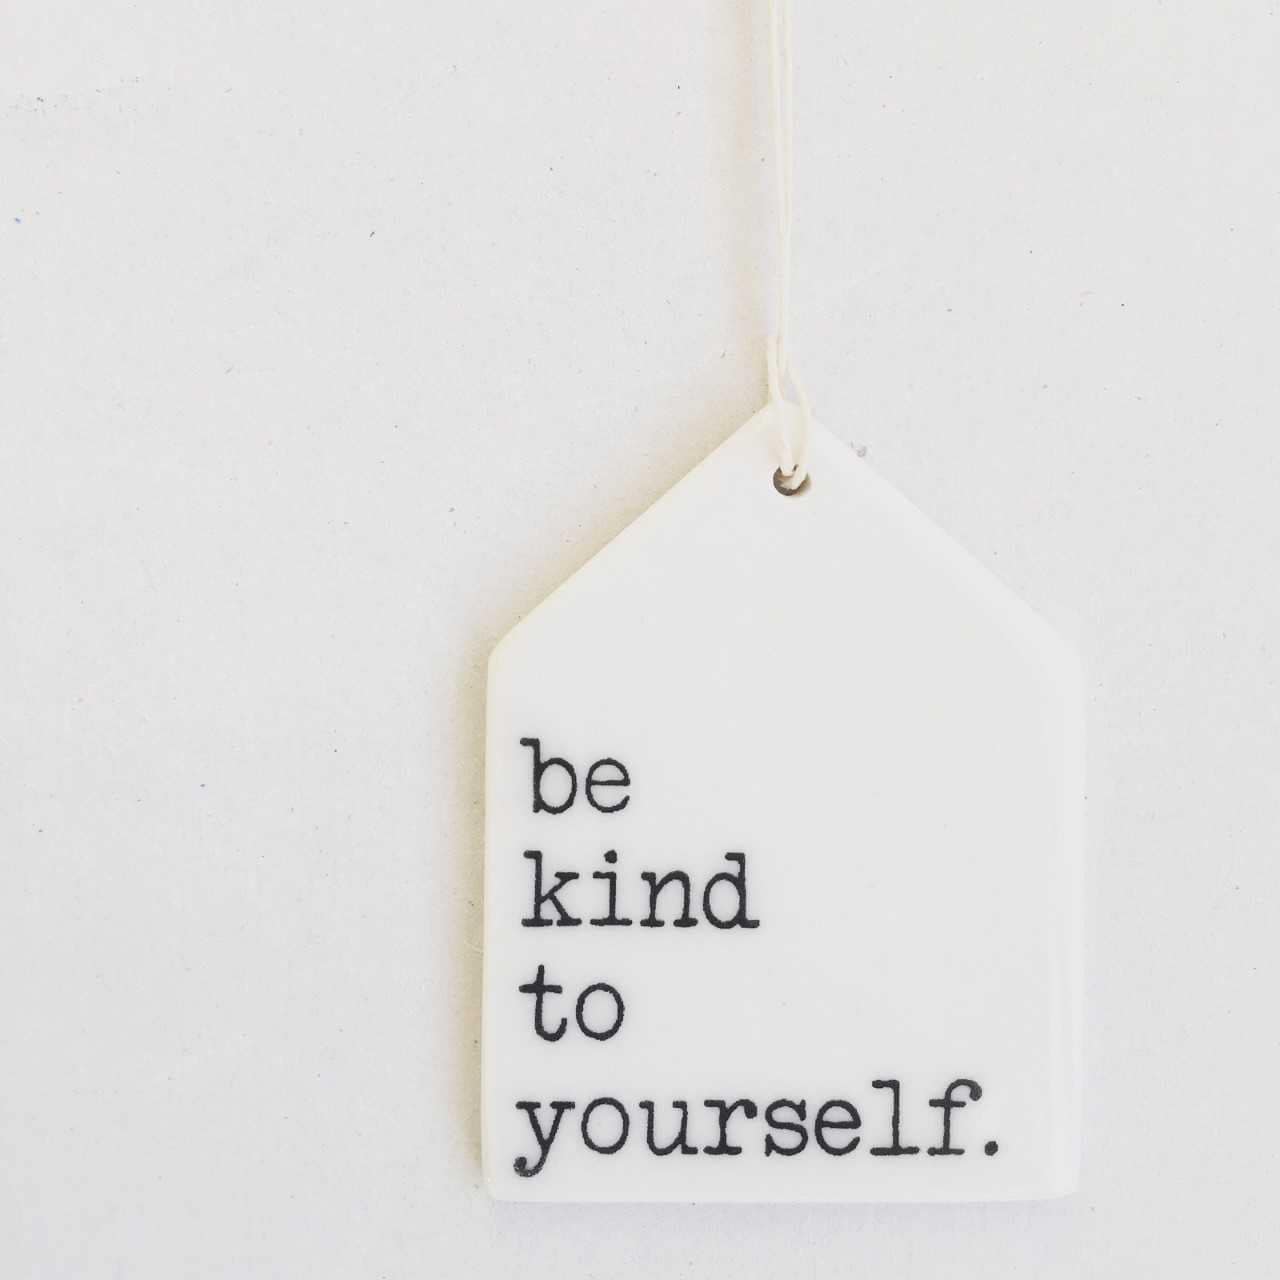 be kind to yourself | self care | self love | ceramic wall tag | ceramic wall art | minimalist design | home decor | meaningful gift